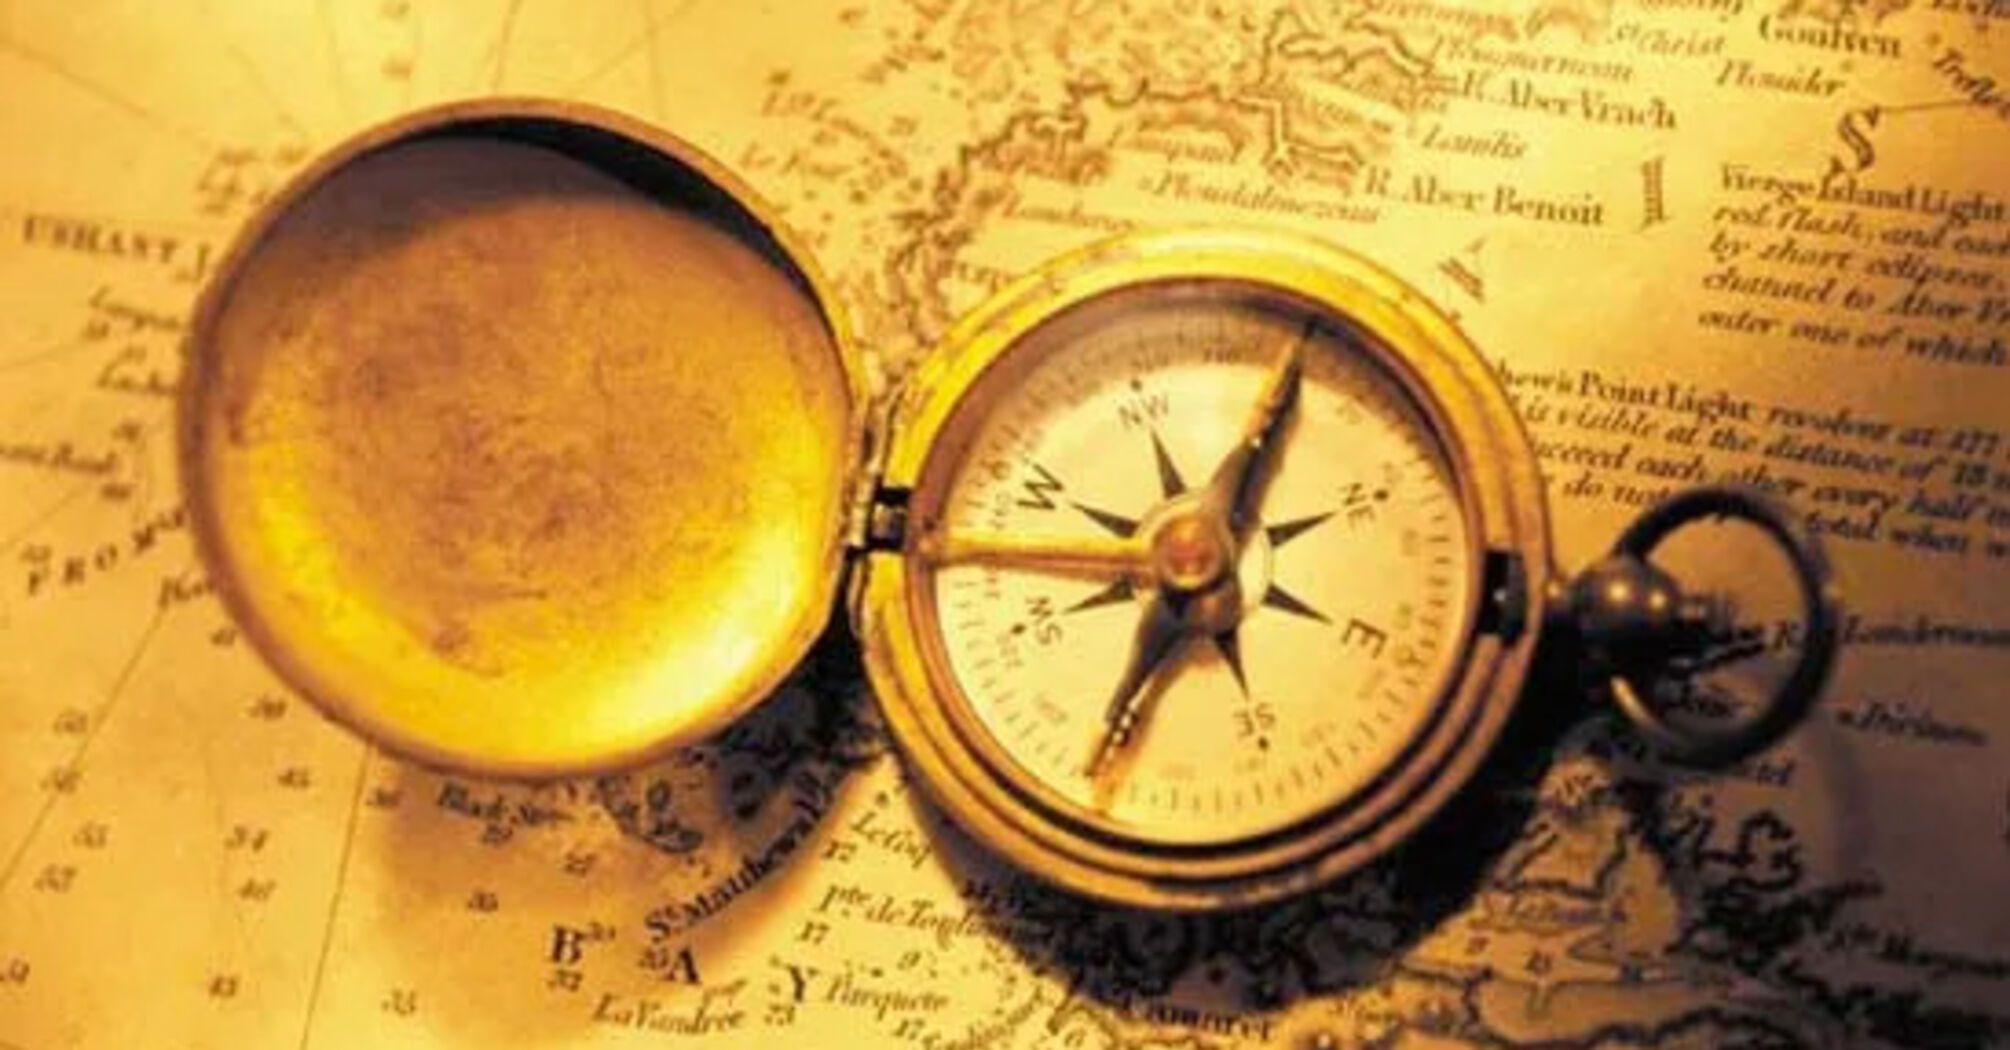 History of the compass